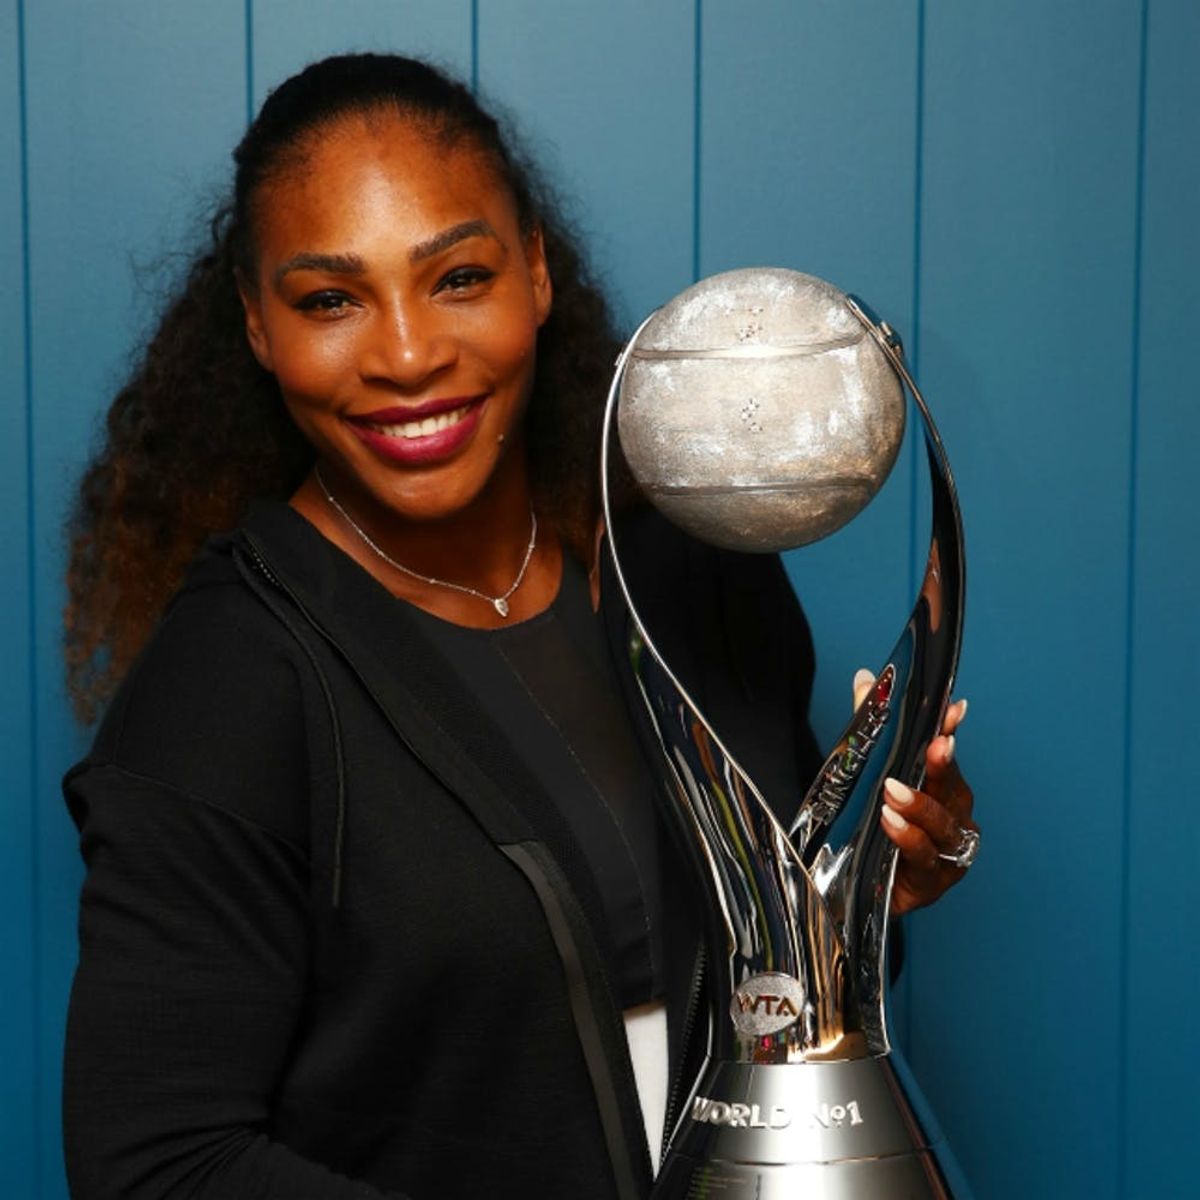 Serena Williams Responded to a Racist Remark About Her Baby and Her Response Is Perfect